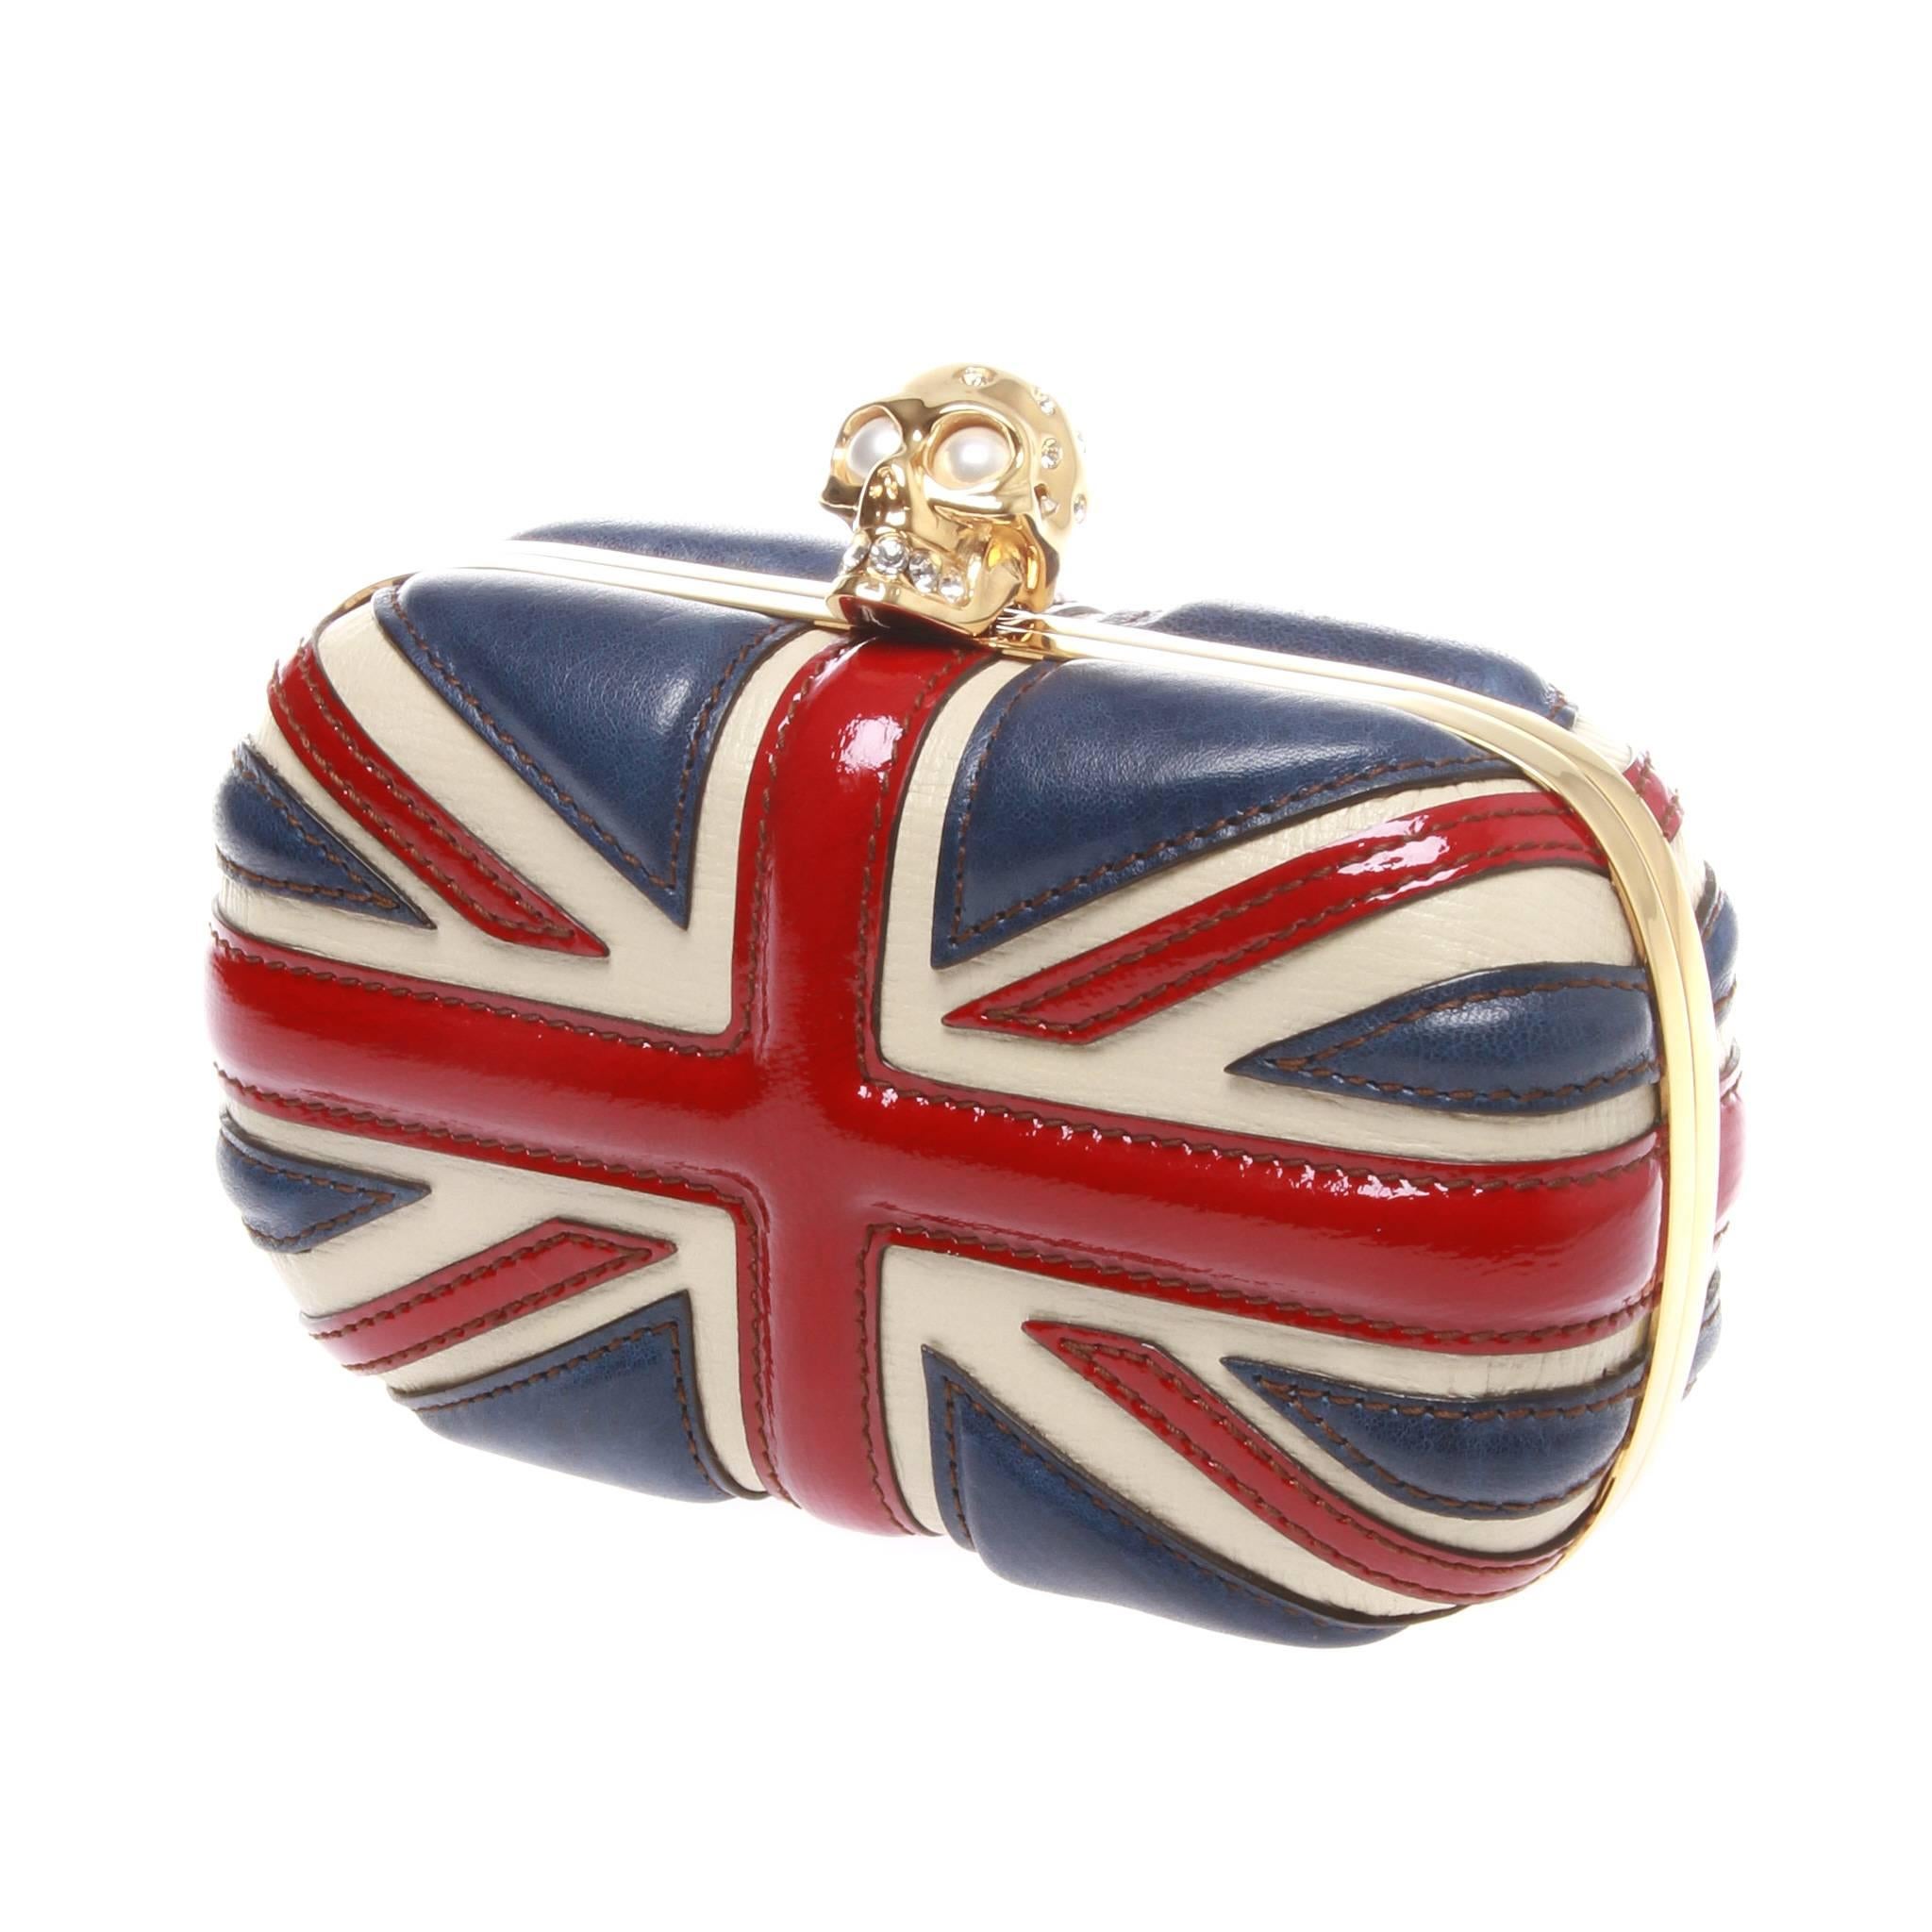 	
ALEXANDER MCQUEEN Red Patent Leather Britannia Skull Box Clutch
Bold and iconic!
An exceptional britannia skull box clutch by ALEXANDER MCQUEEN.
It features a smooth leather in red, white and blue, this structured Union Jack box clutch is